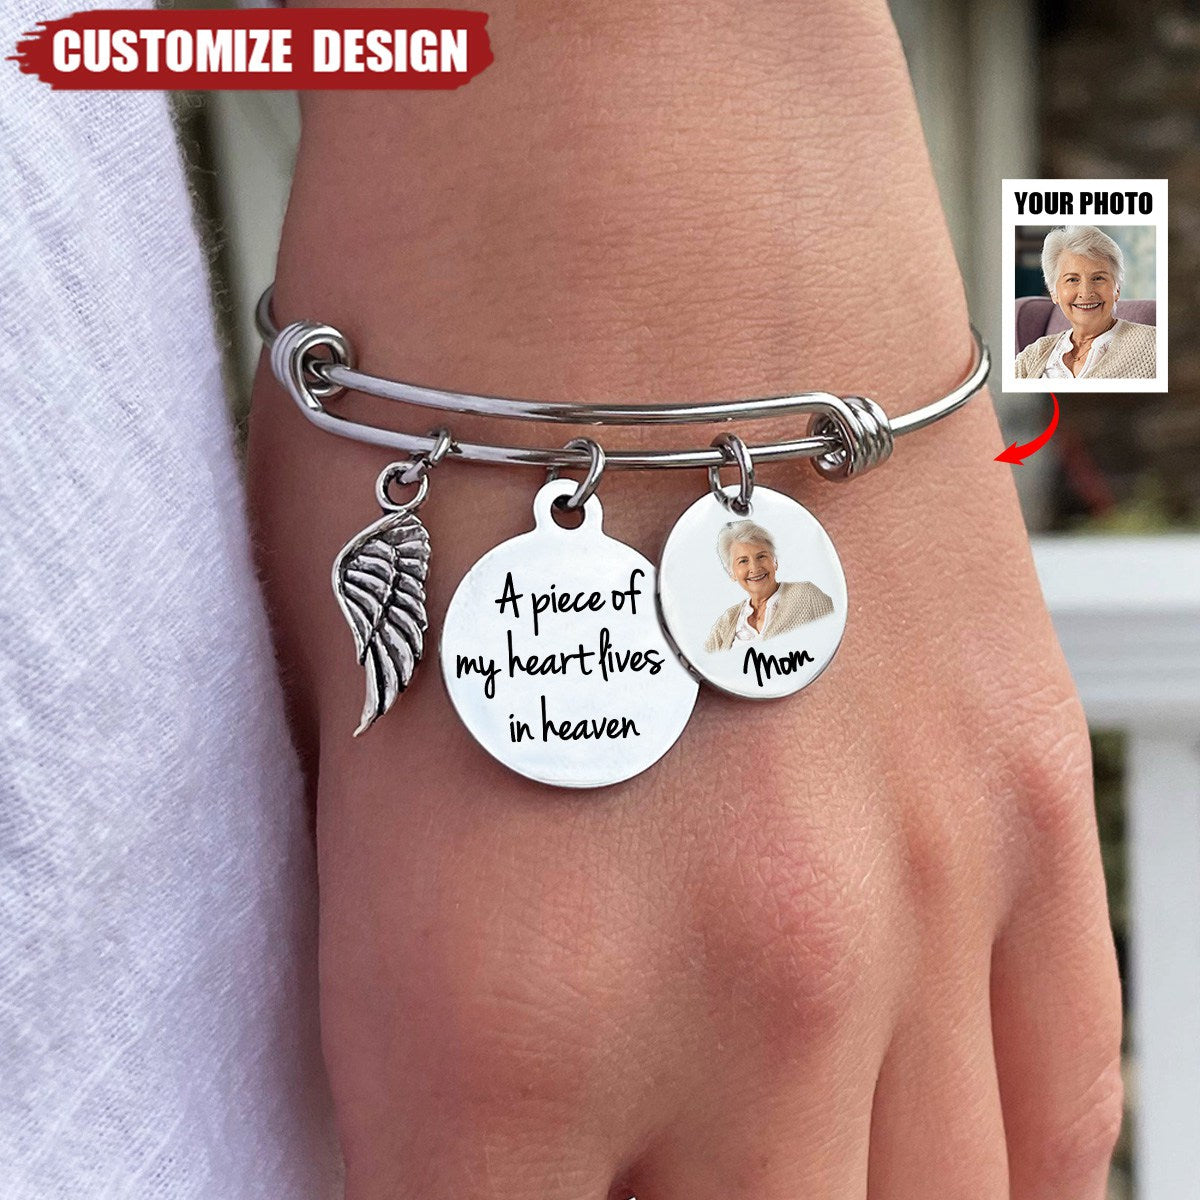 A Piece Of My Heart Lives In Heaven - Personalized Memorial Photo Bracelet